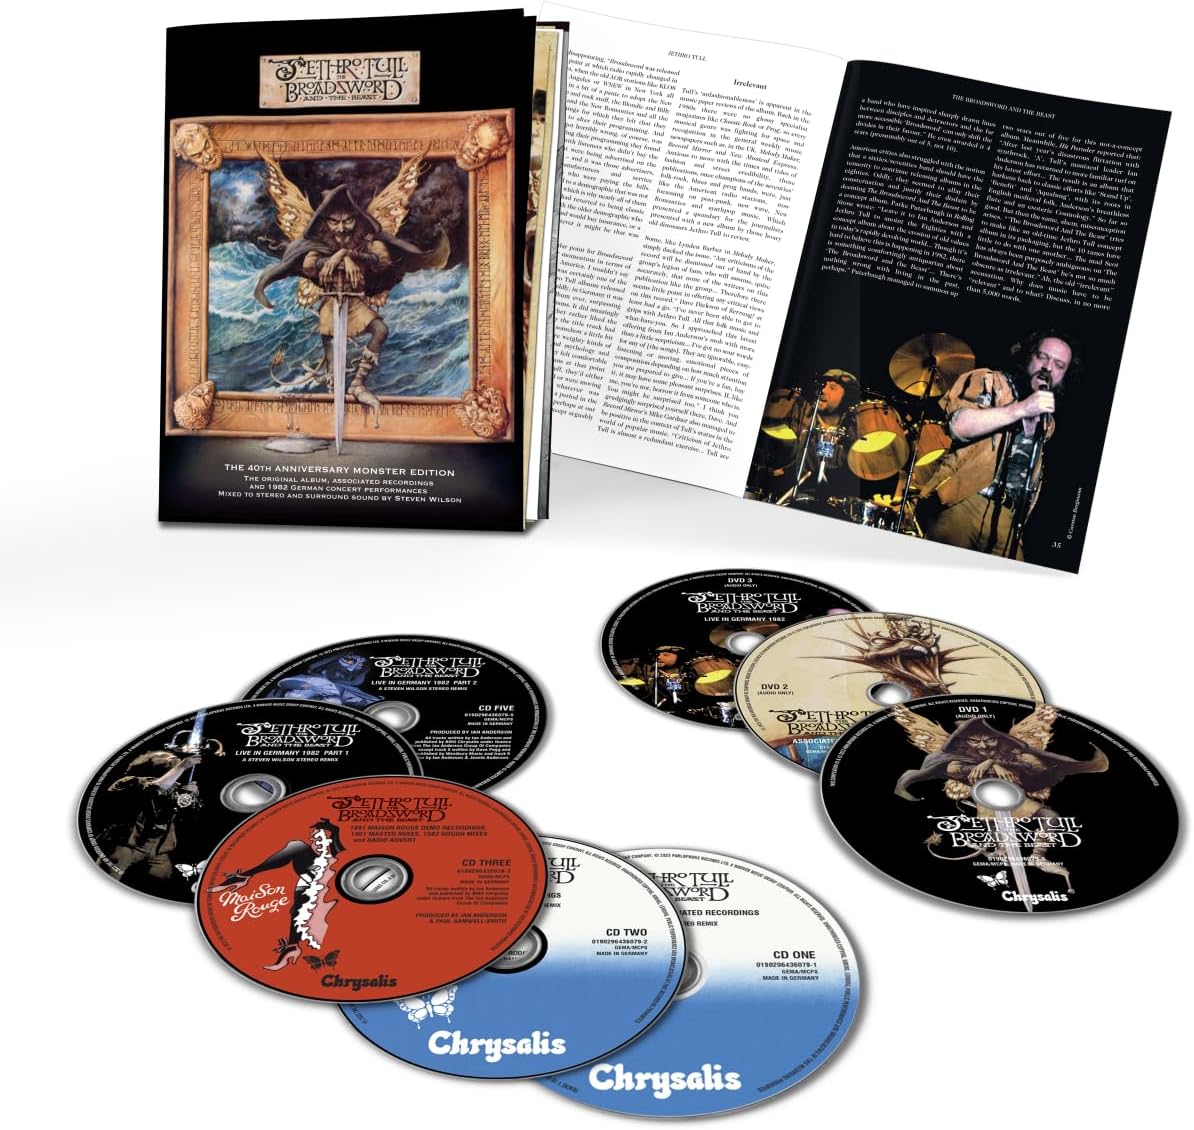 Jethro_Tull_Broadsword_and_the_Beast_40th_Anniversary_Monster_Edition CD album cover